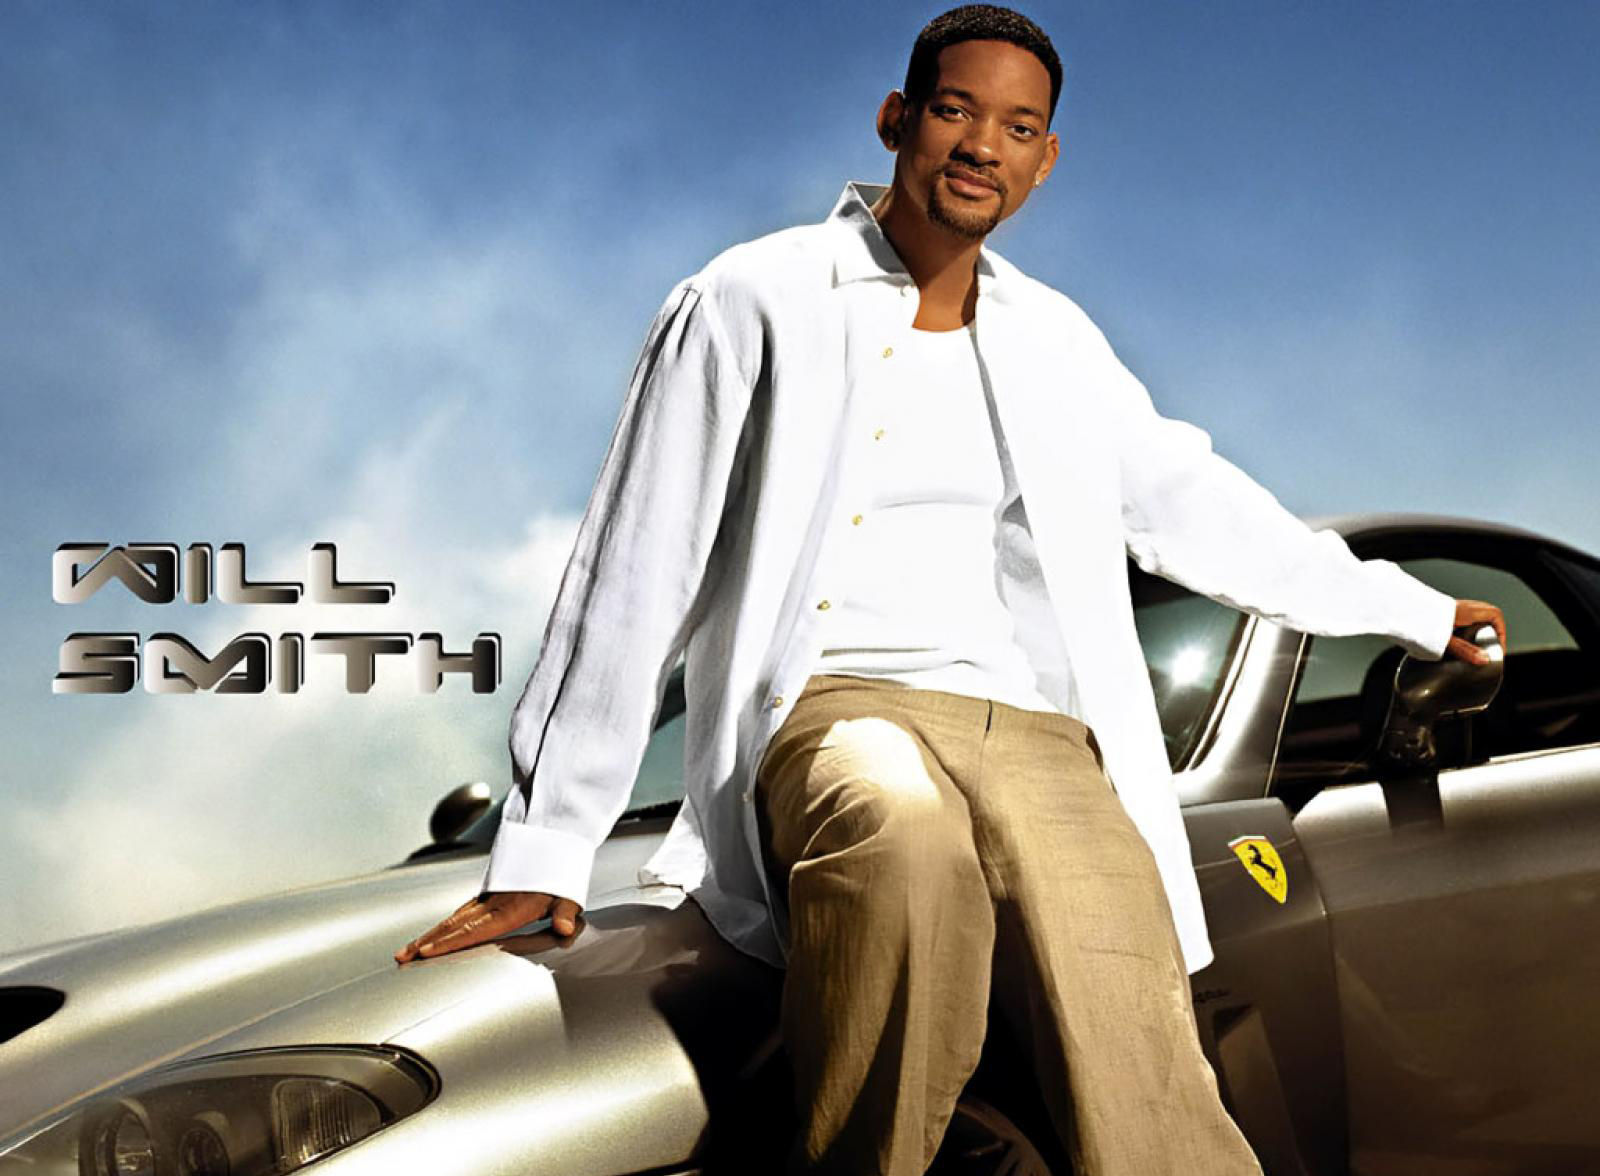 1920x1080202149 Will Smith with Ferrari wallpaper 1920x1080202149  Resolution Wallpaper, HD Celebrities 4K Wallpapers, Images, Photos and  Background - Wallpapers Den